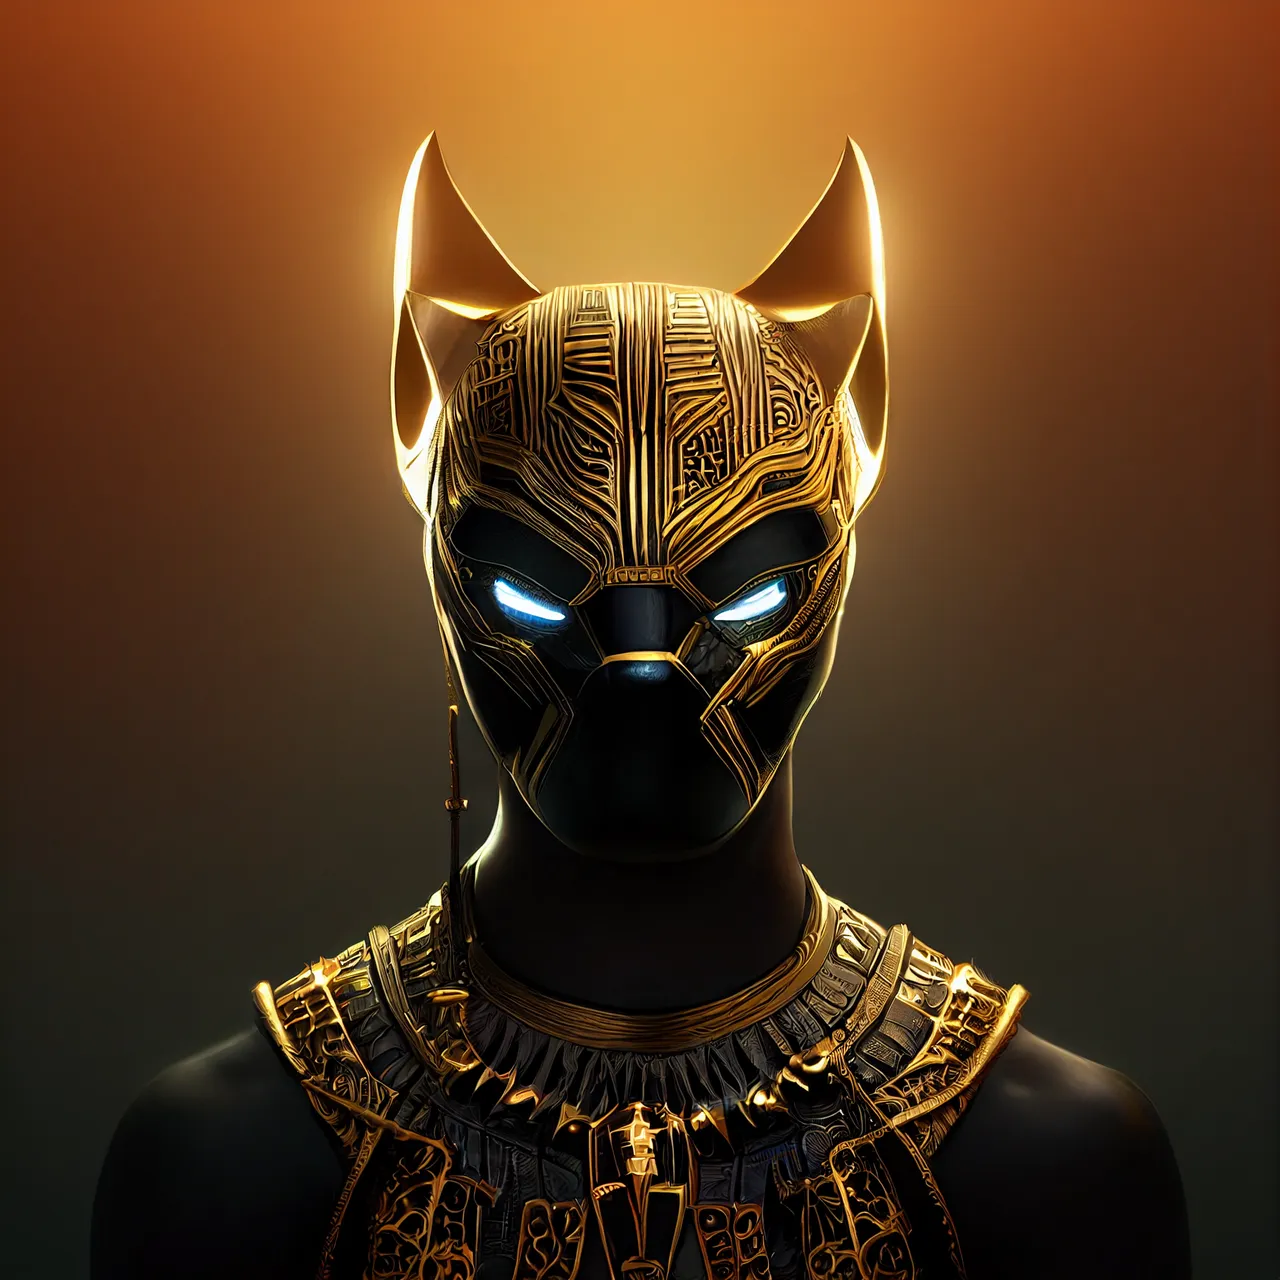 Ed_Privat_beautiful_black_panther_god_surreal_mythical_dreamy_a_8d34f54d-c03f-4394-9fb1-40d420e26c95.png